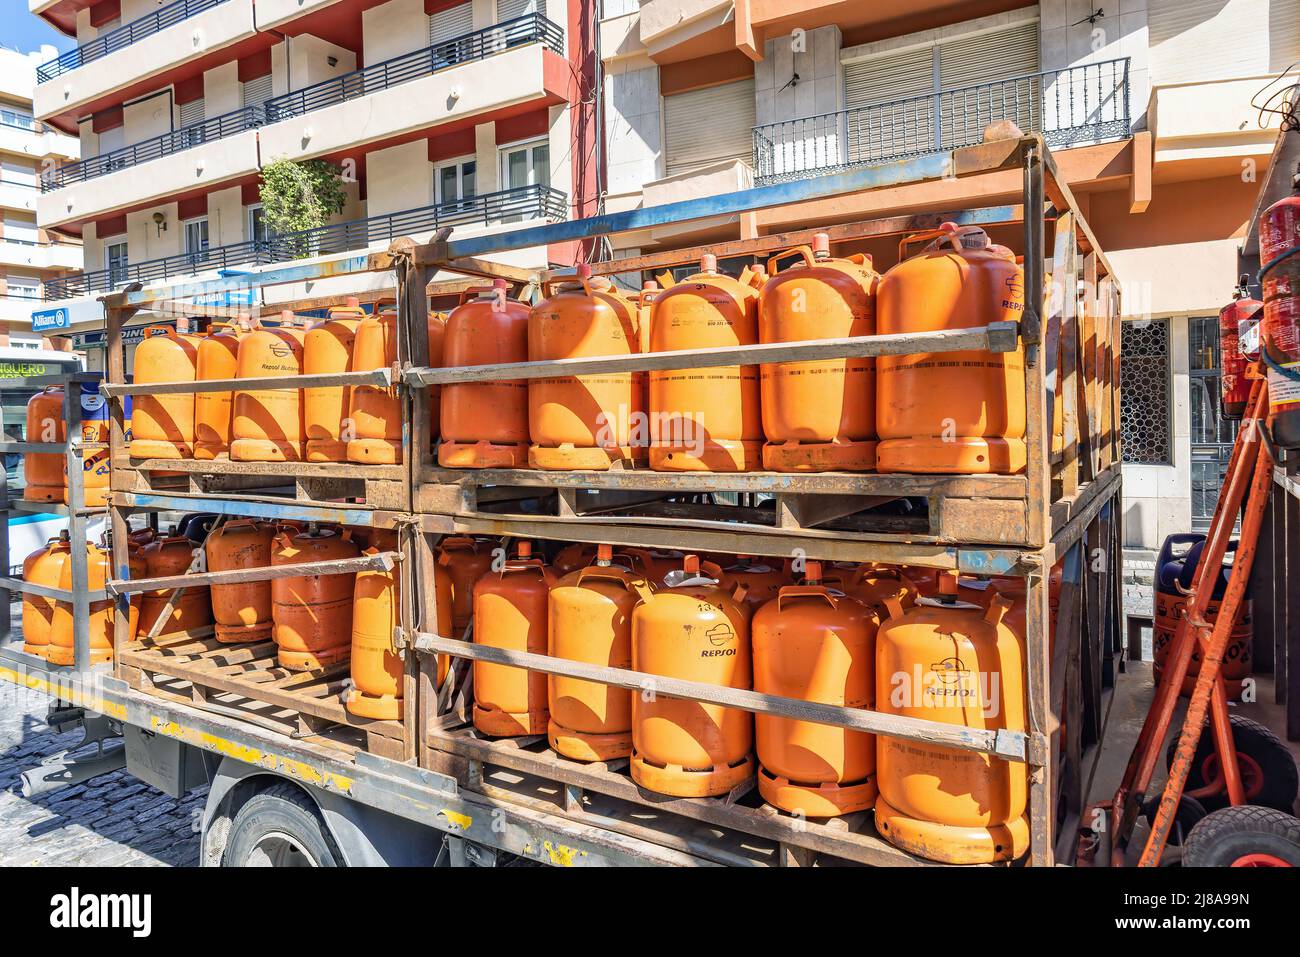 Huelva, Spain - May 10, 2022: A truck delivering orange butane bottles from the Repsol company Stock Photo